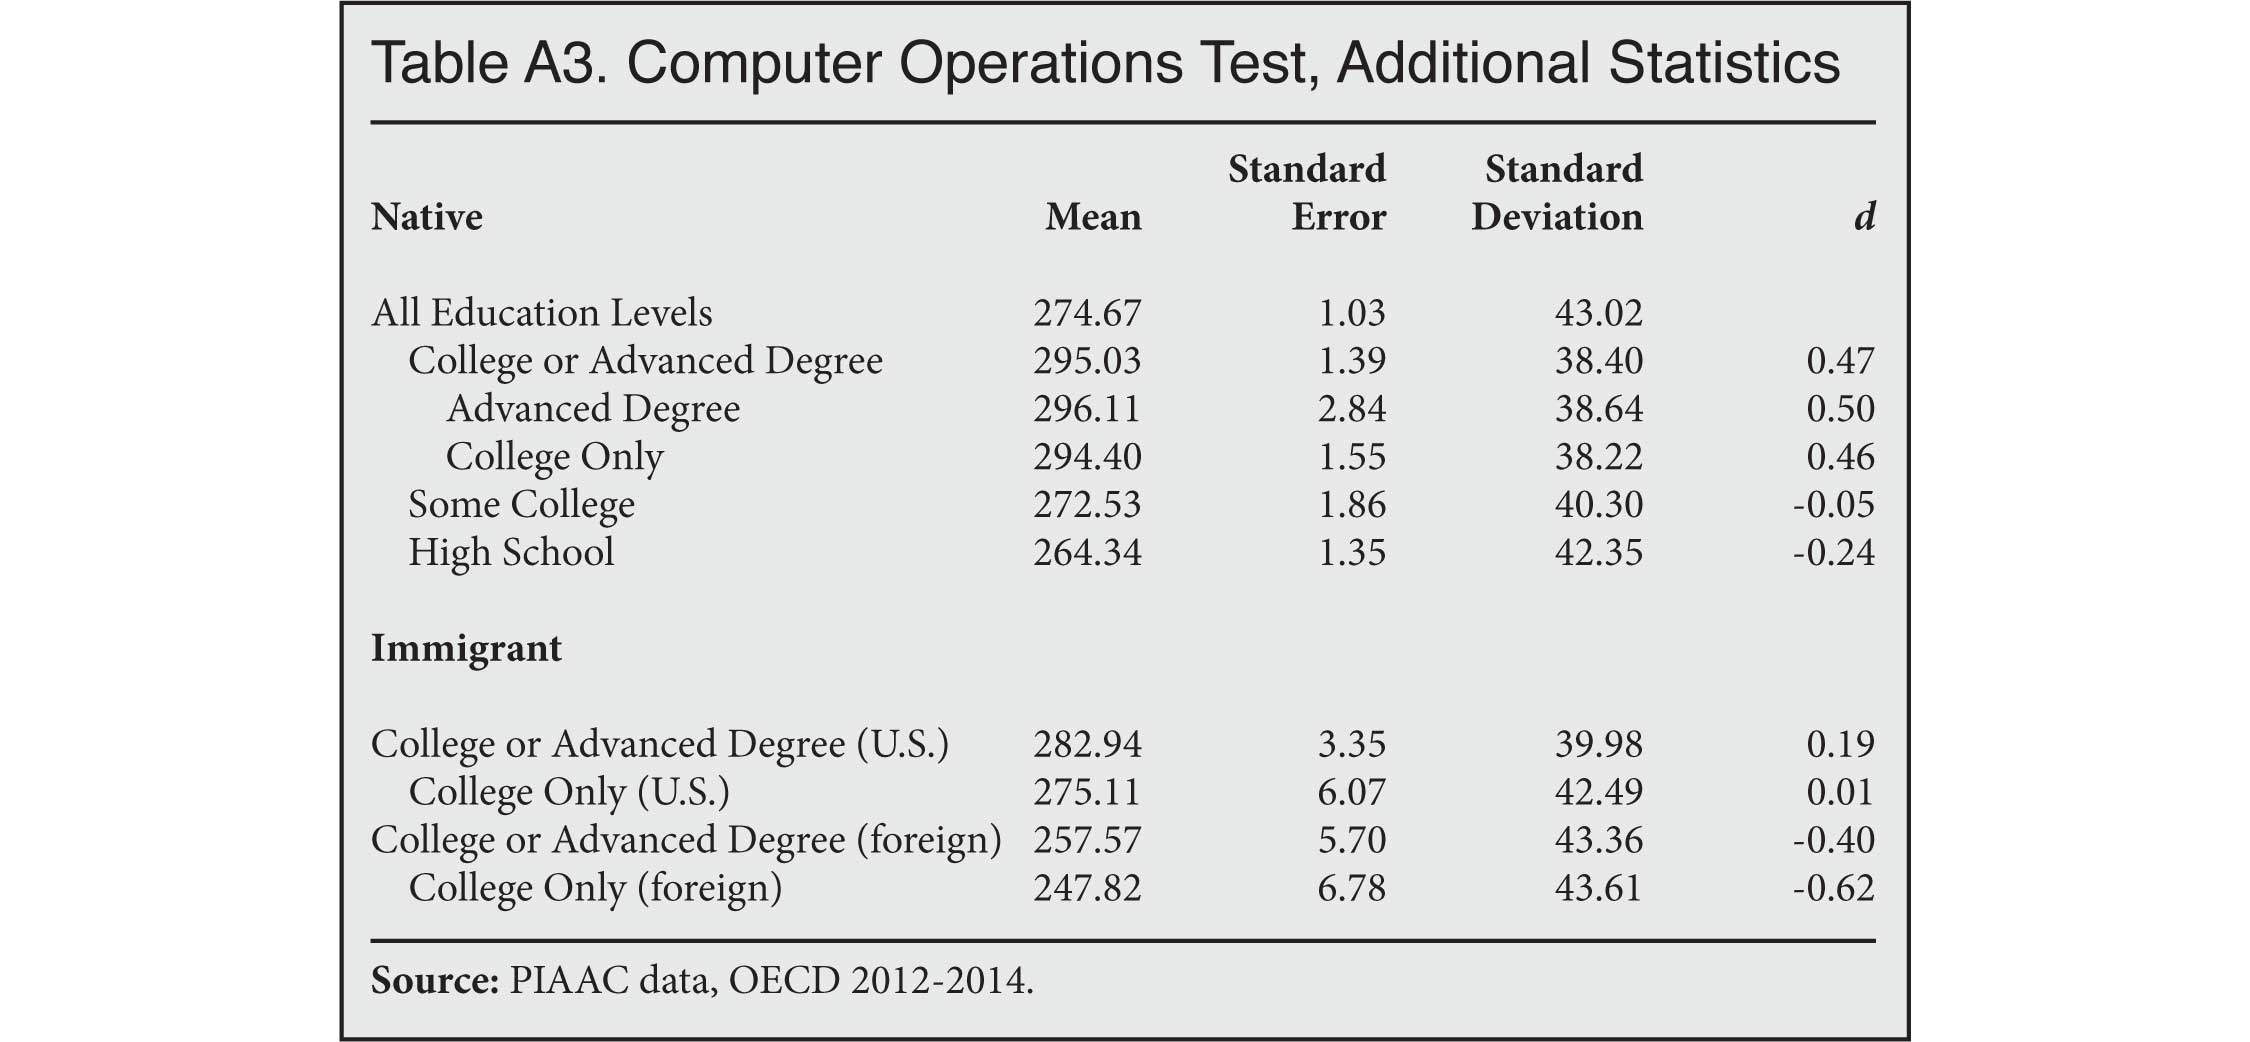 Table: Computer Operations Test, Additional Statistics